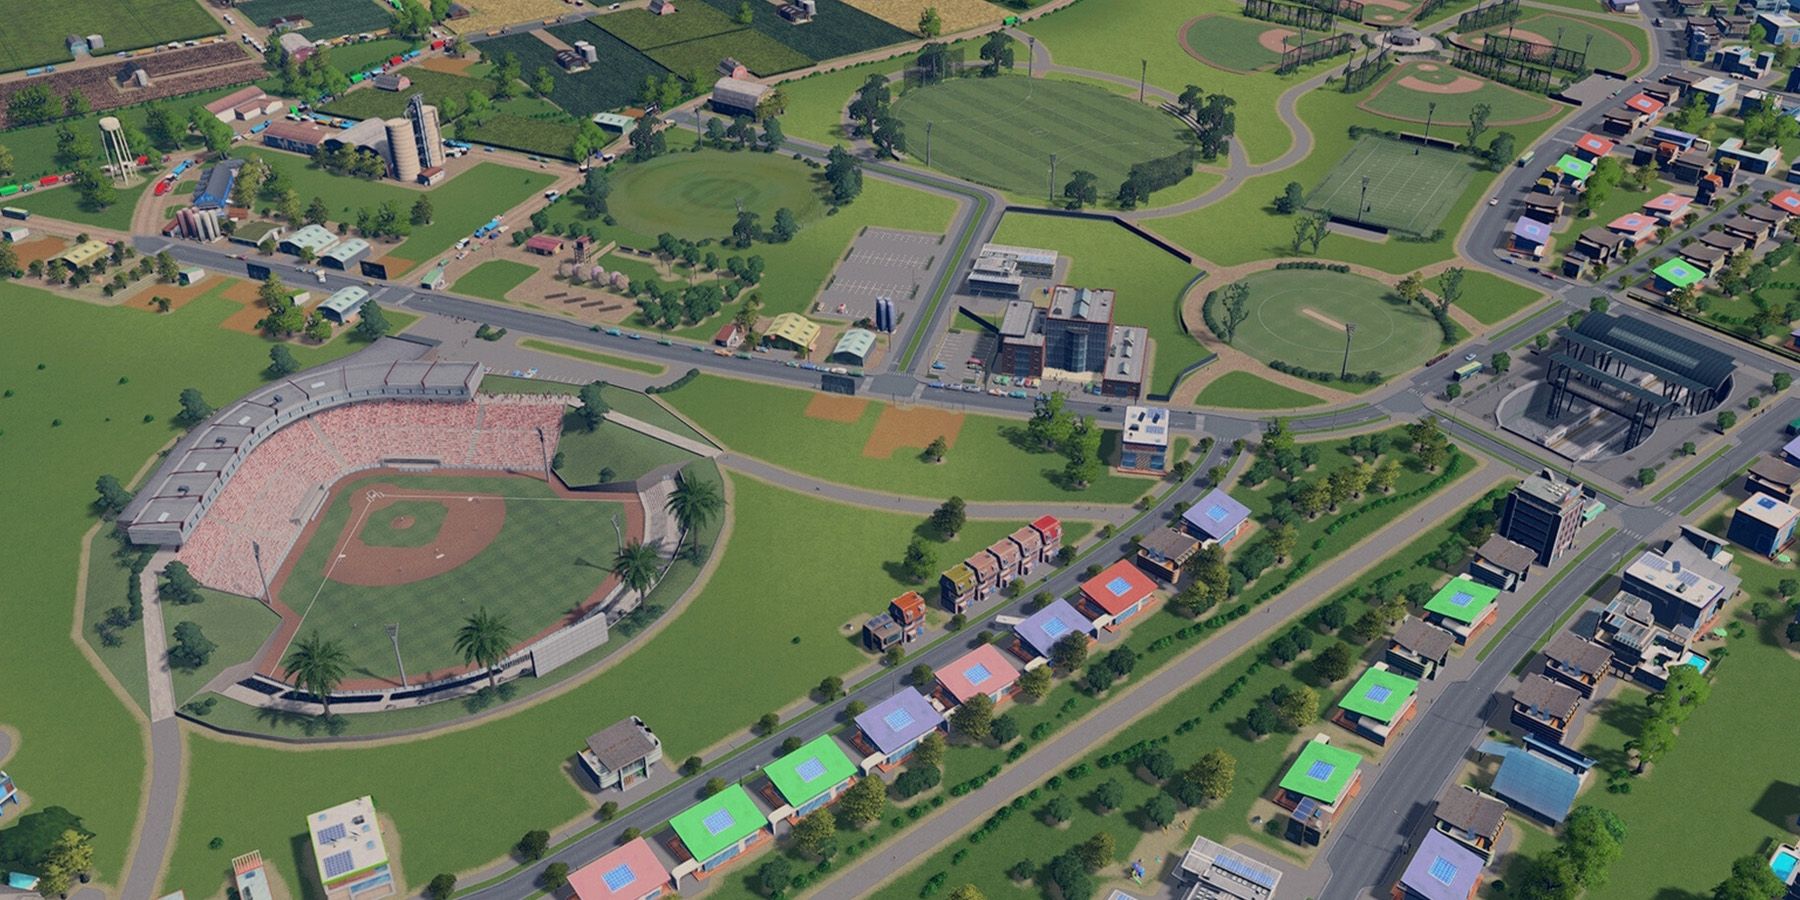 Cities Skylines 2 won't get DLC until performance issues are fixed |  GamesRadar+